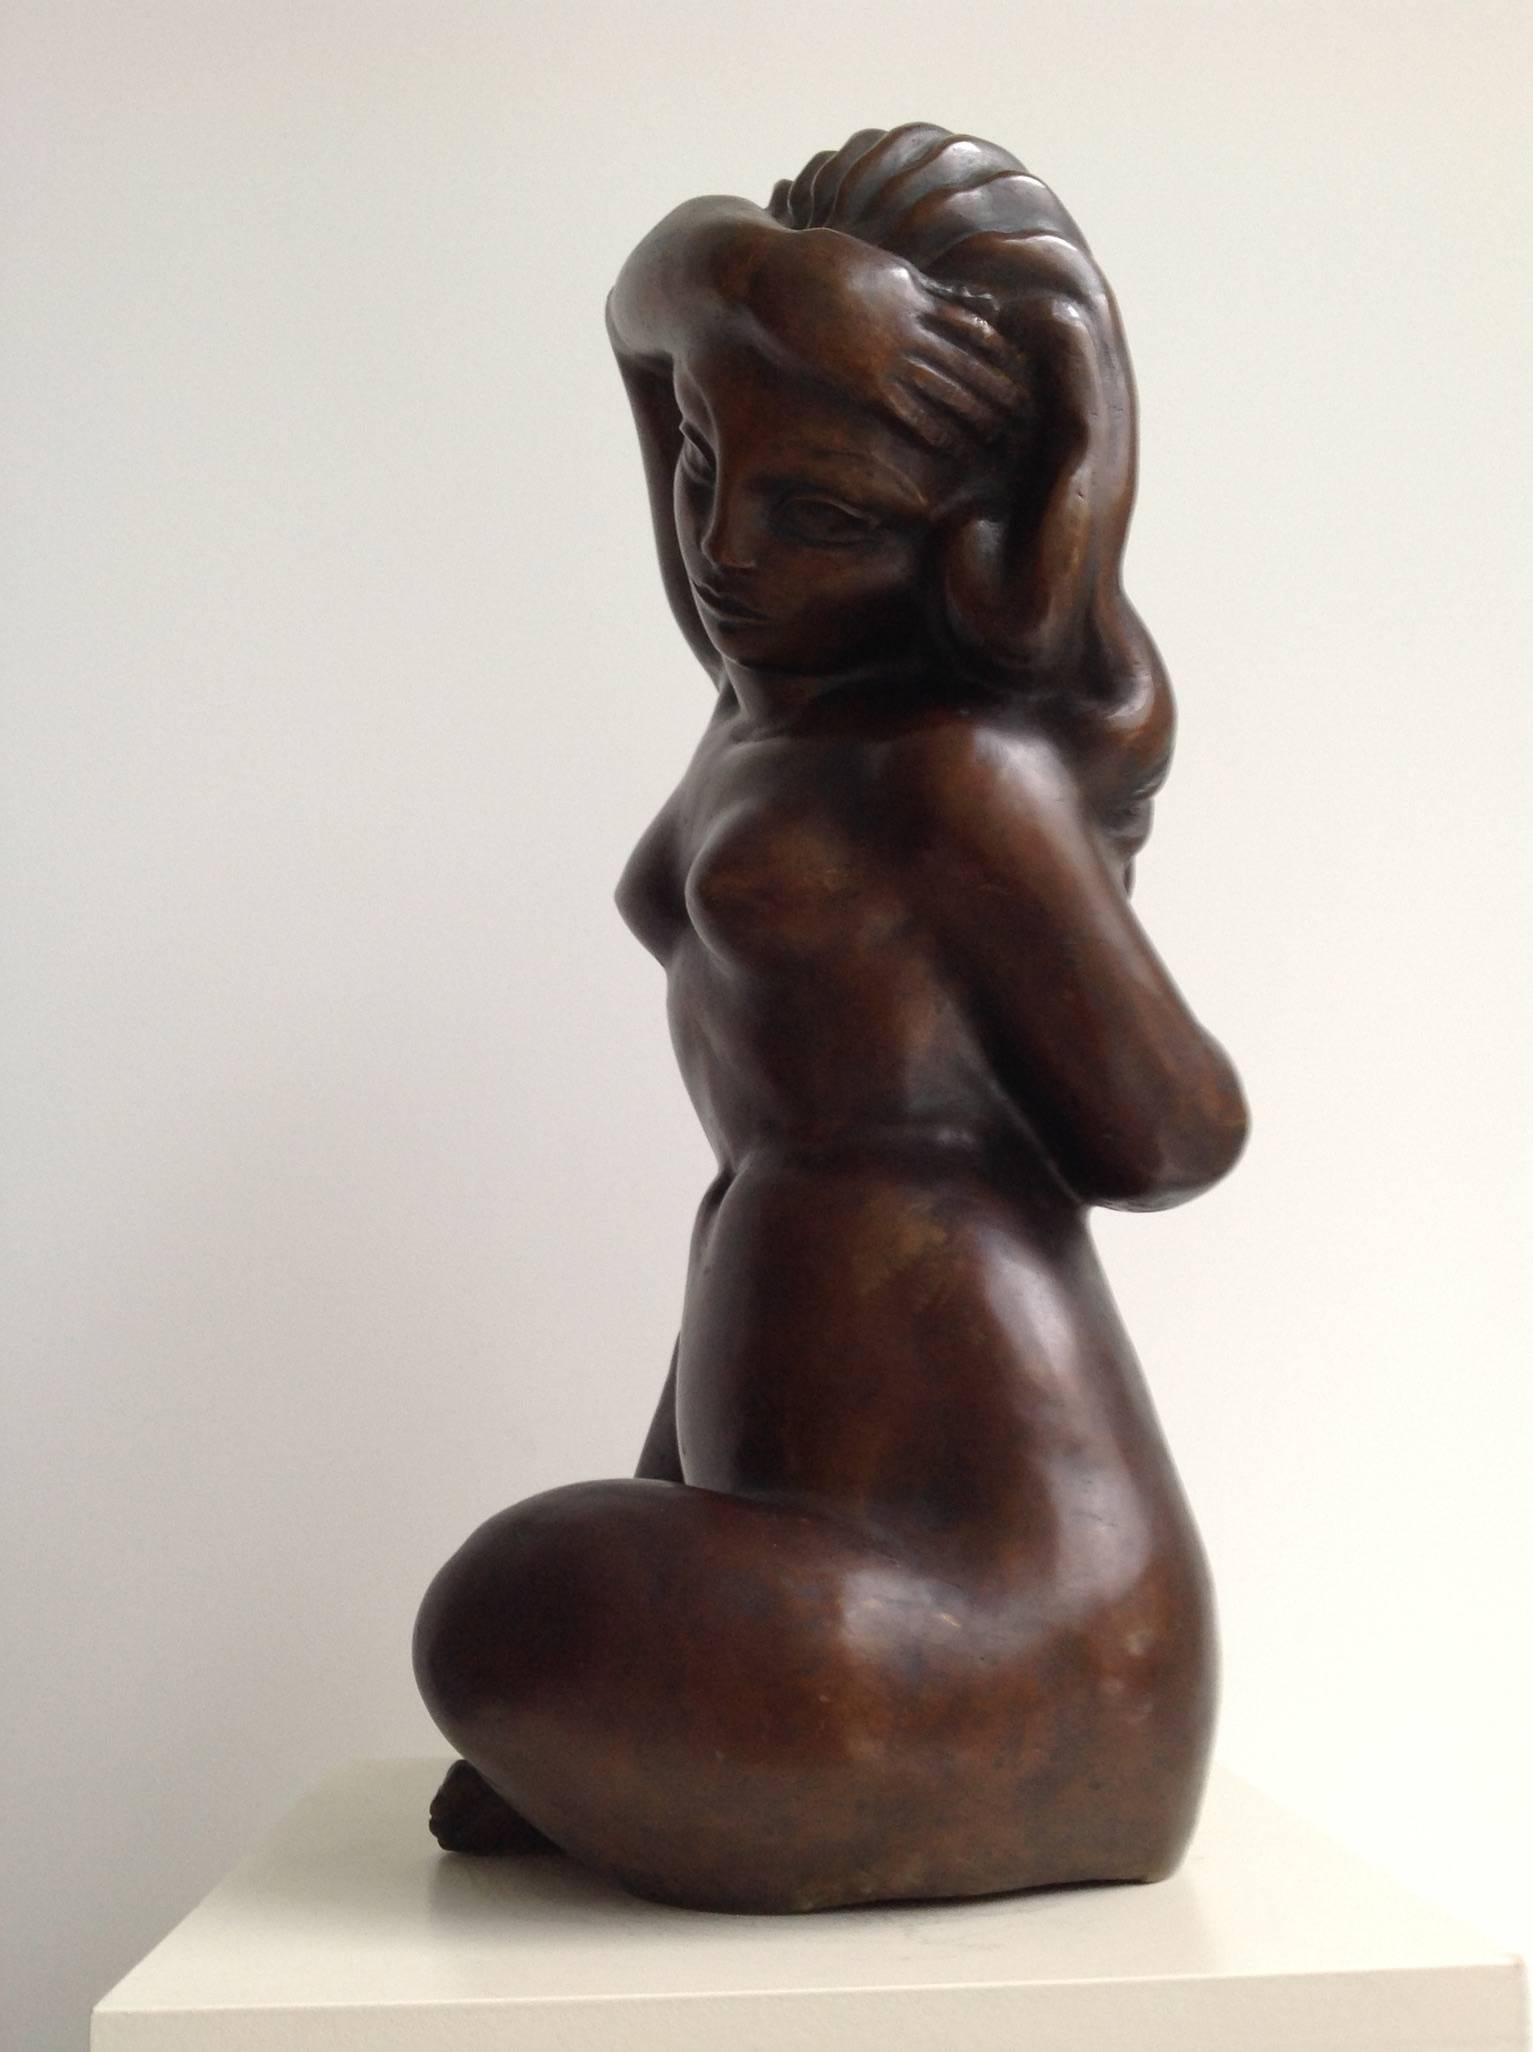 Remarkable sculpture of a female nude with long hair putting her right arm over her head and her left arm behind her back.